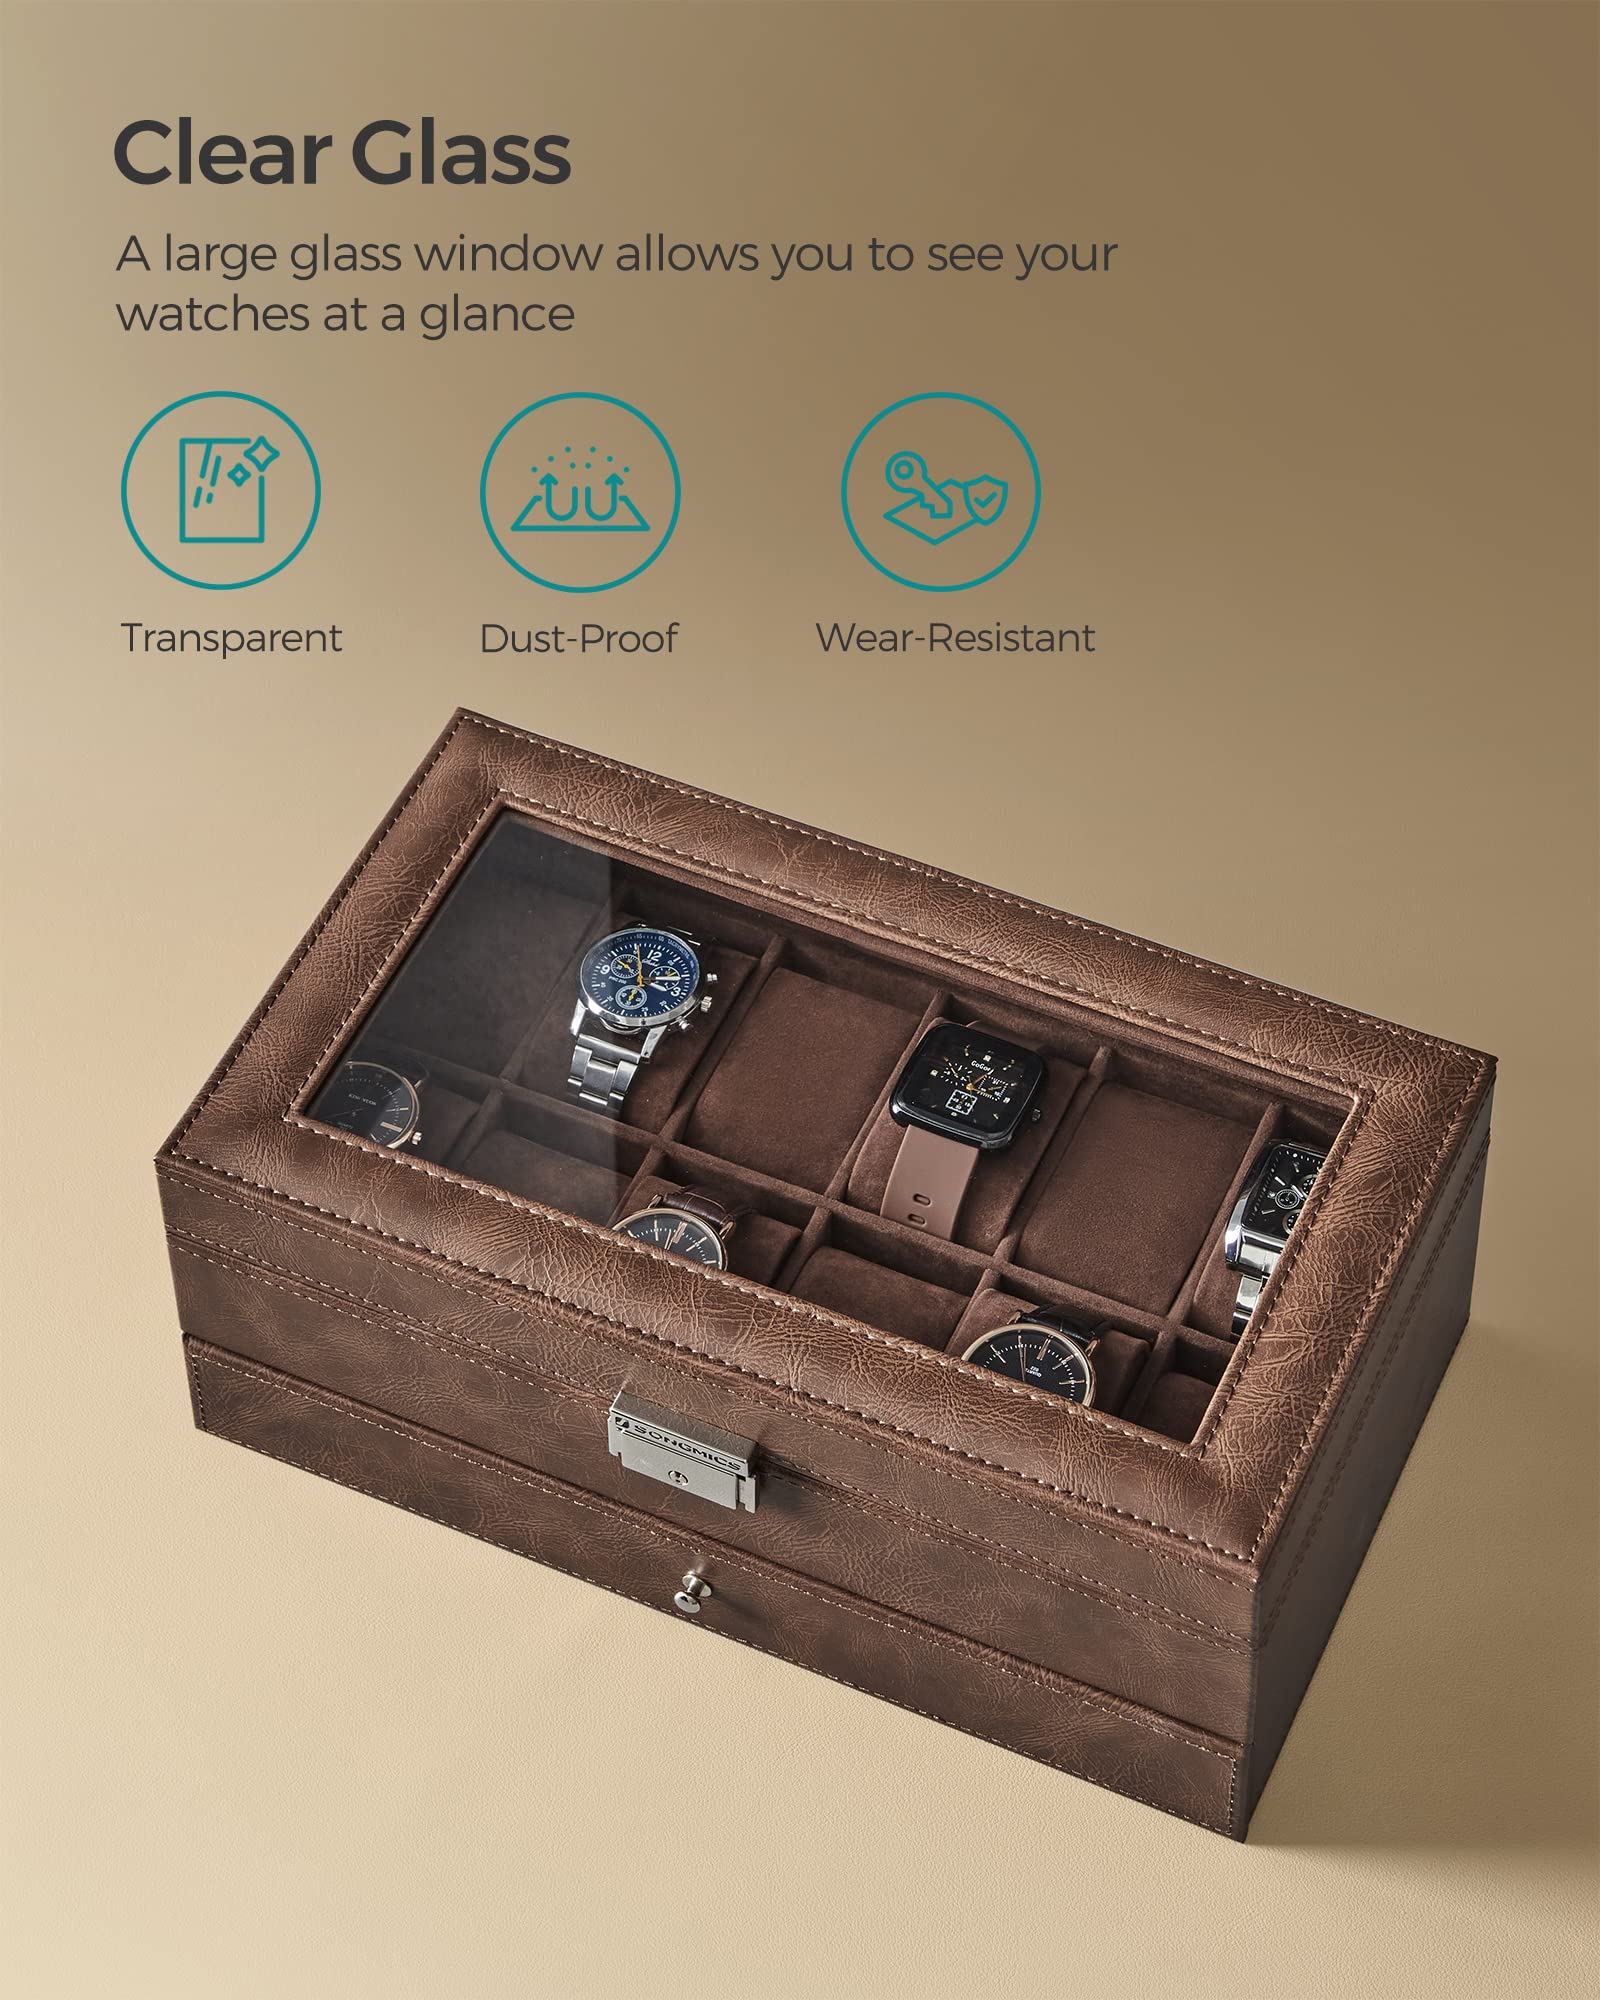 SONGMICS 12-Slot Watch Box, Lockable Watch Case with Glass Lid, 2 Layers, with 1 Drawer for Rings, Bracelets, Gift Idea, Brown Synthetic Leather, Brown Lining UJWB012K01